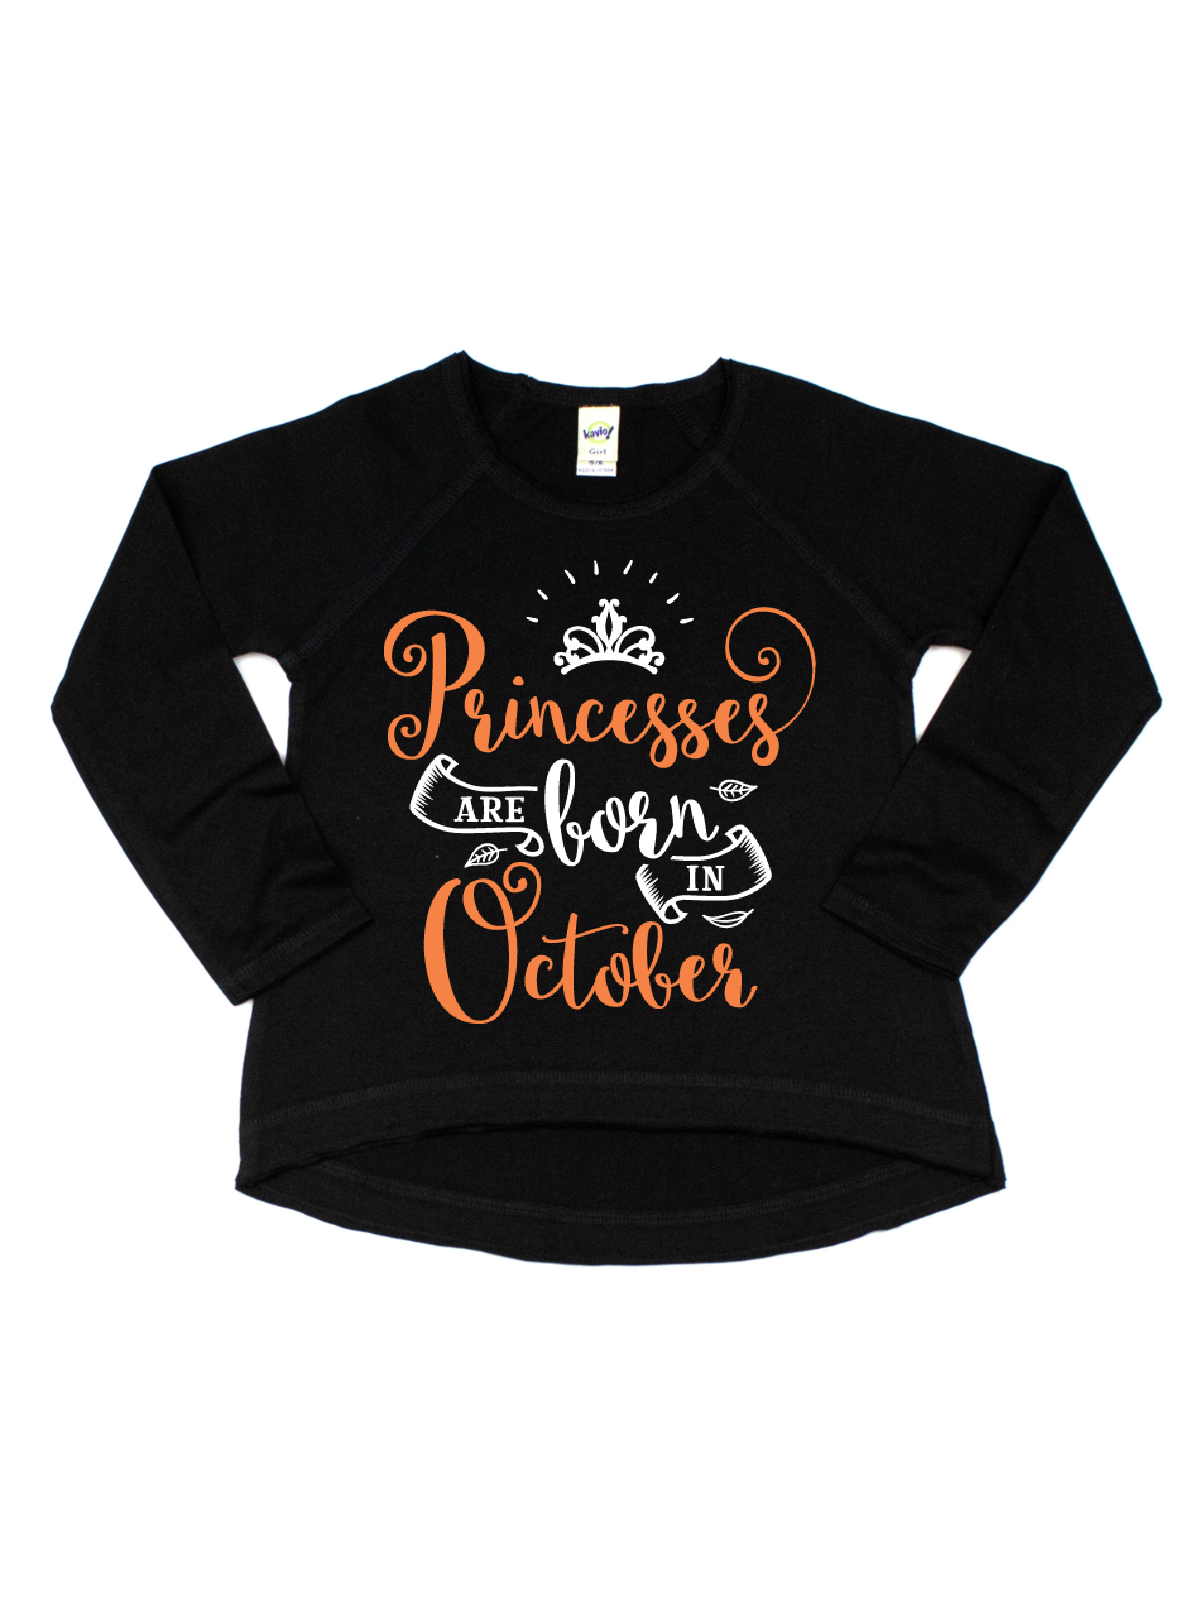 princesses are born in october black long sleeve girls shirt